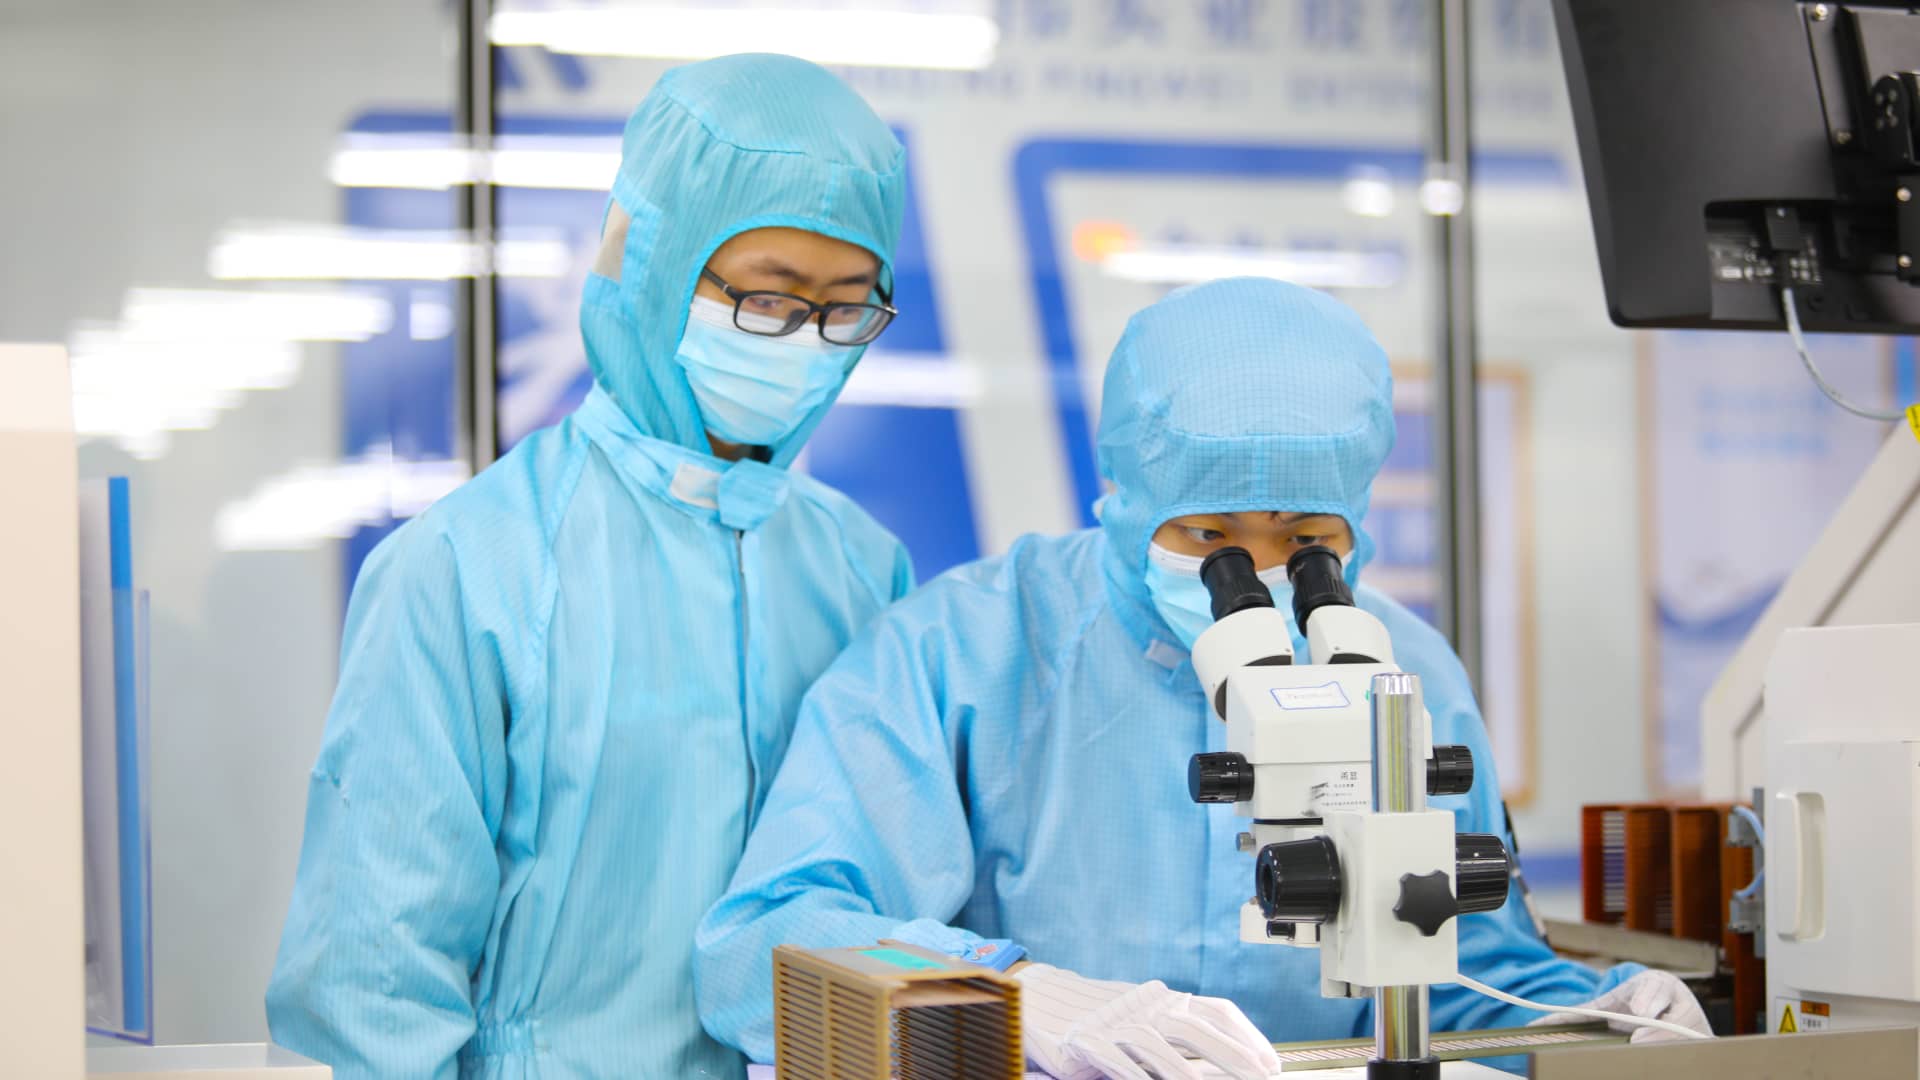 Don’t underestimate China’s ability to build its own advanced chips despite U.S. curbs, tech analysts say